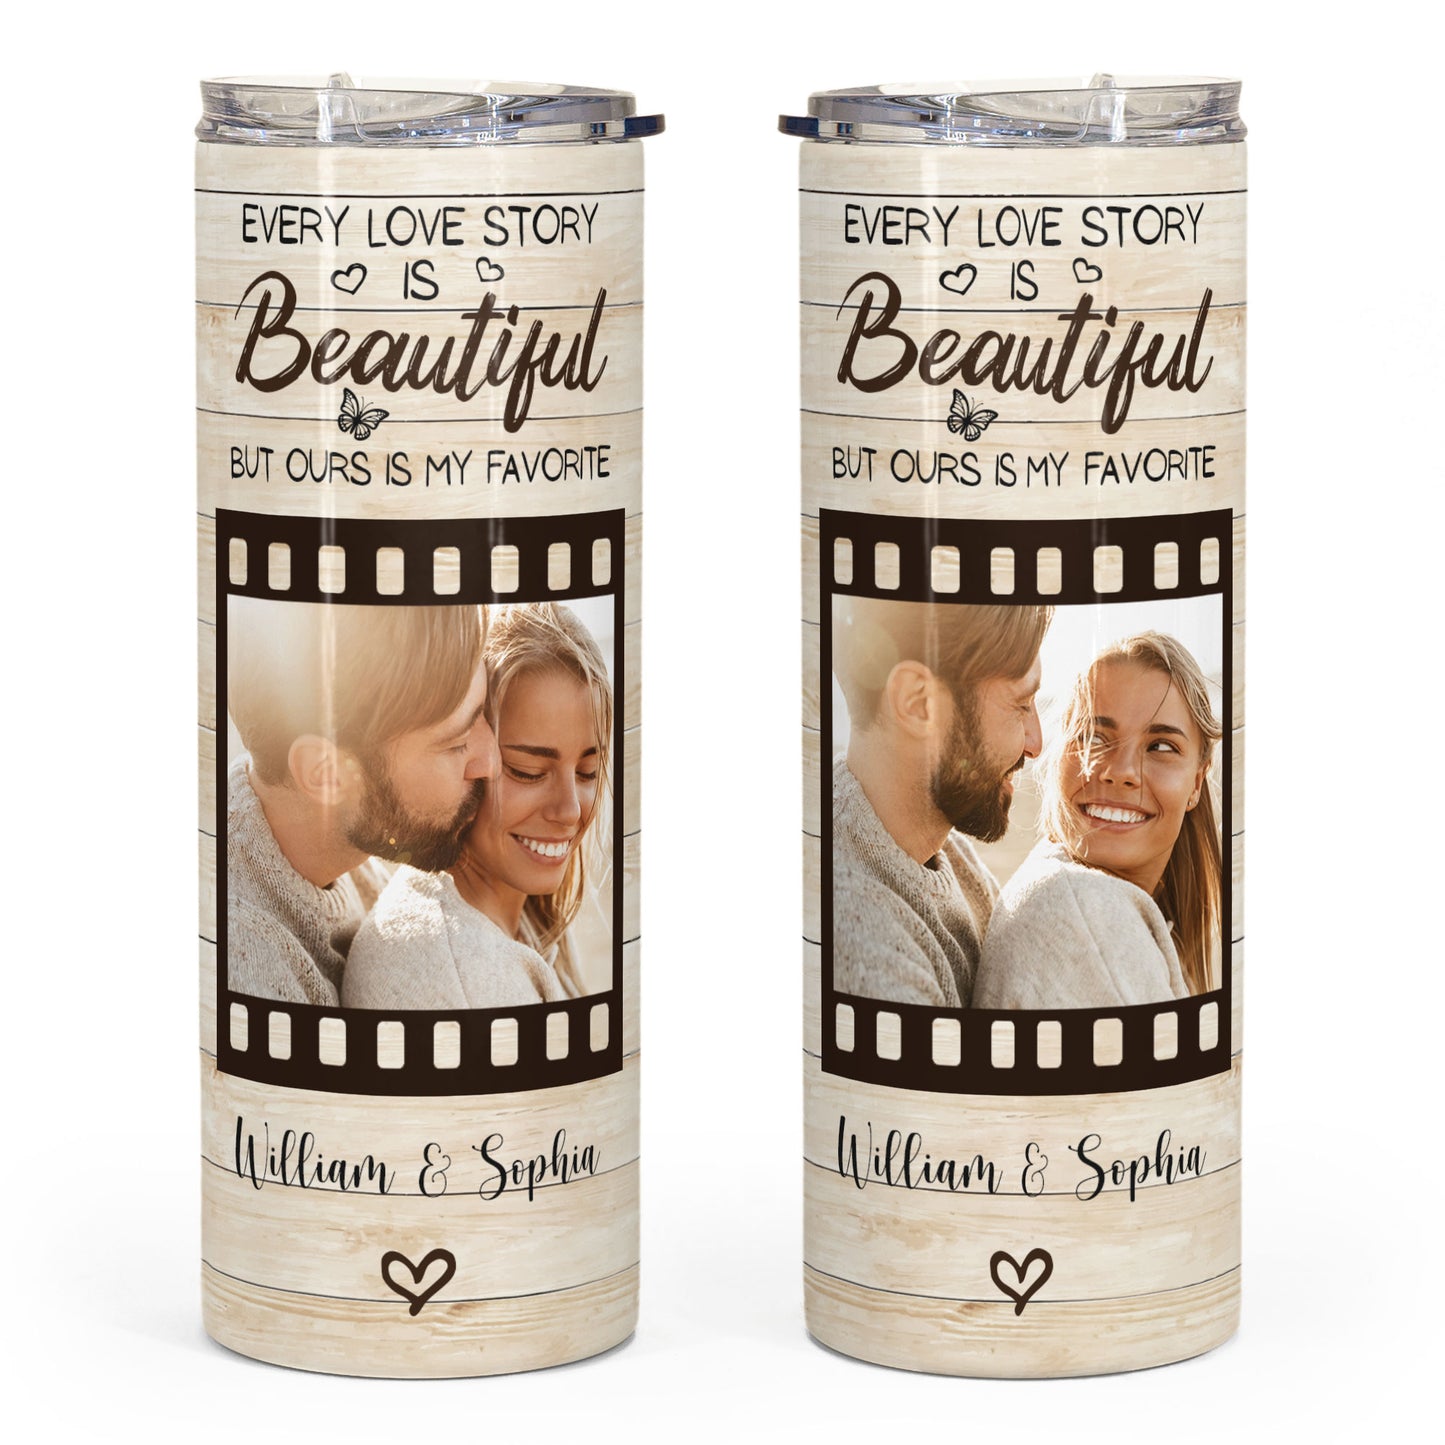 Every Love Story Is Beautiful But Ours Is My Favorite - Personalized Photo Skinny Tumbler